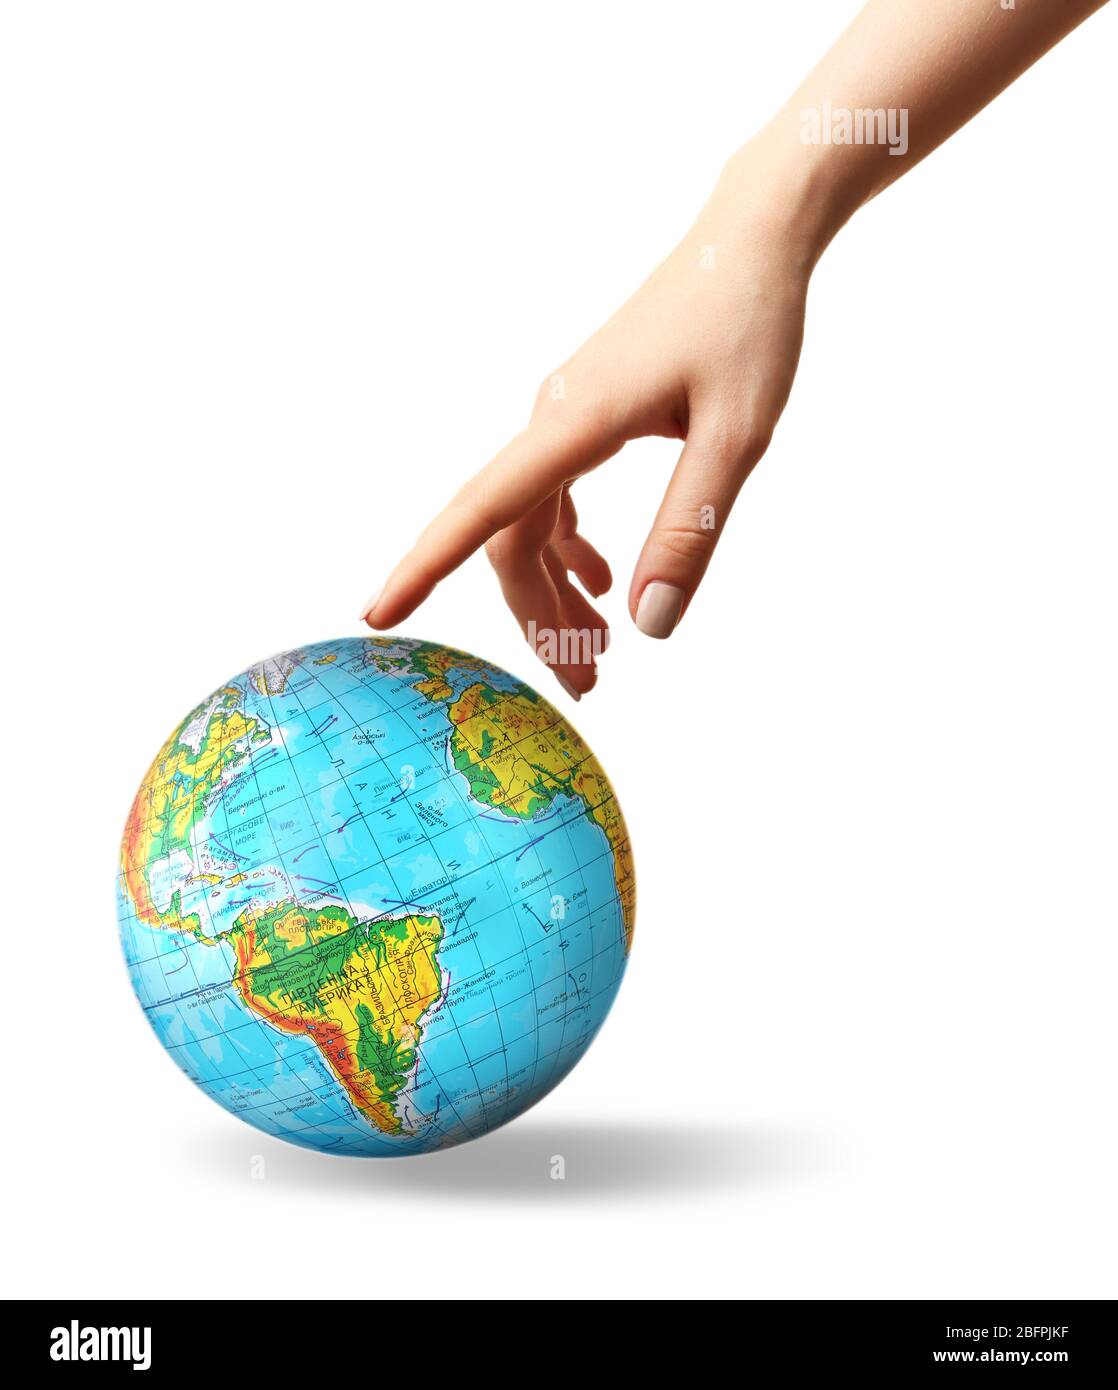 Woman pointing on globe, white background. Concept of global leadership and geopolitics Stock Photo